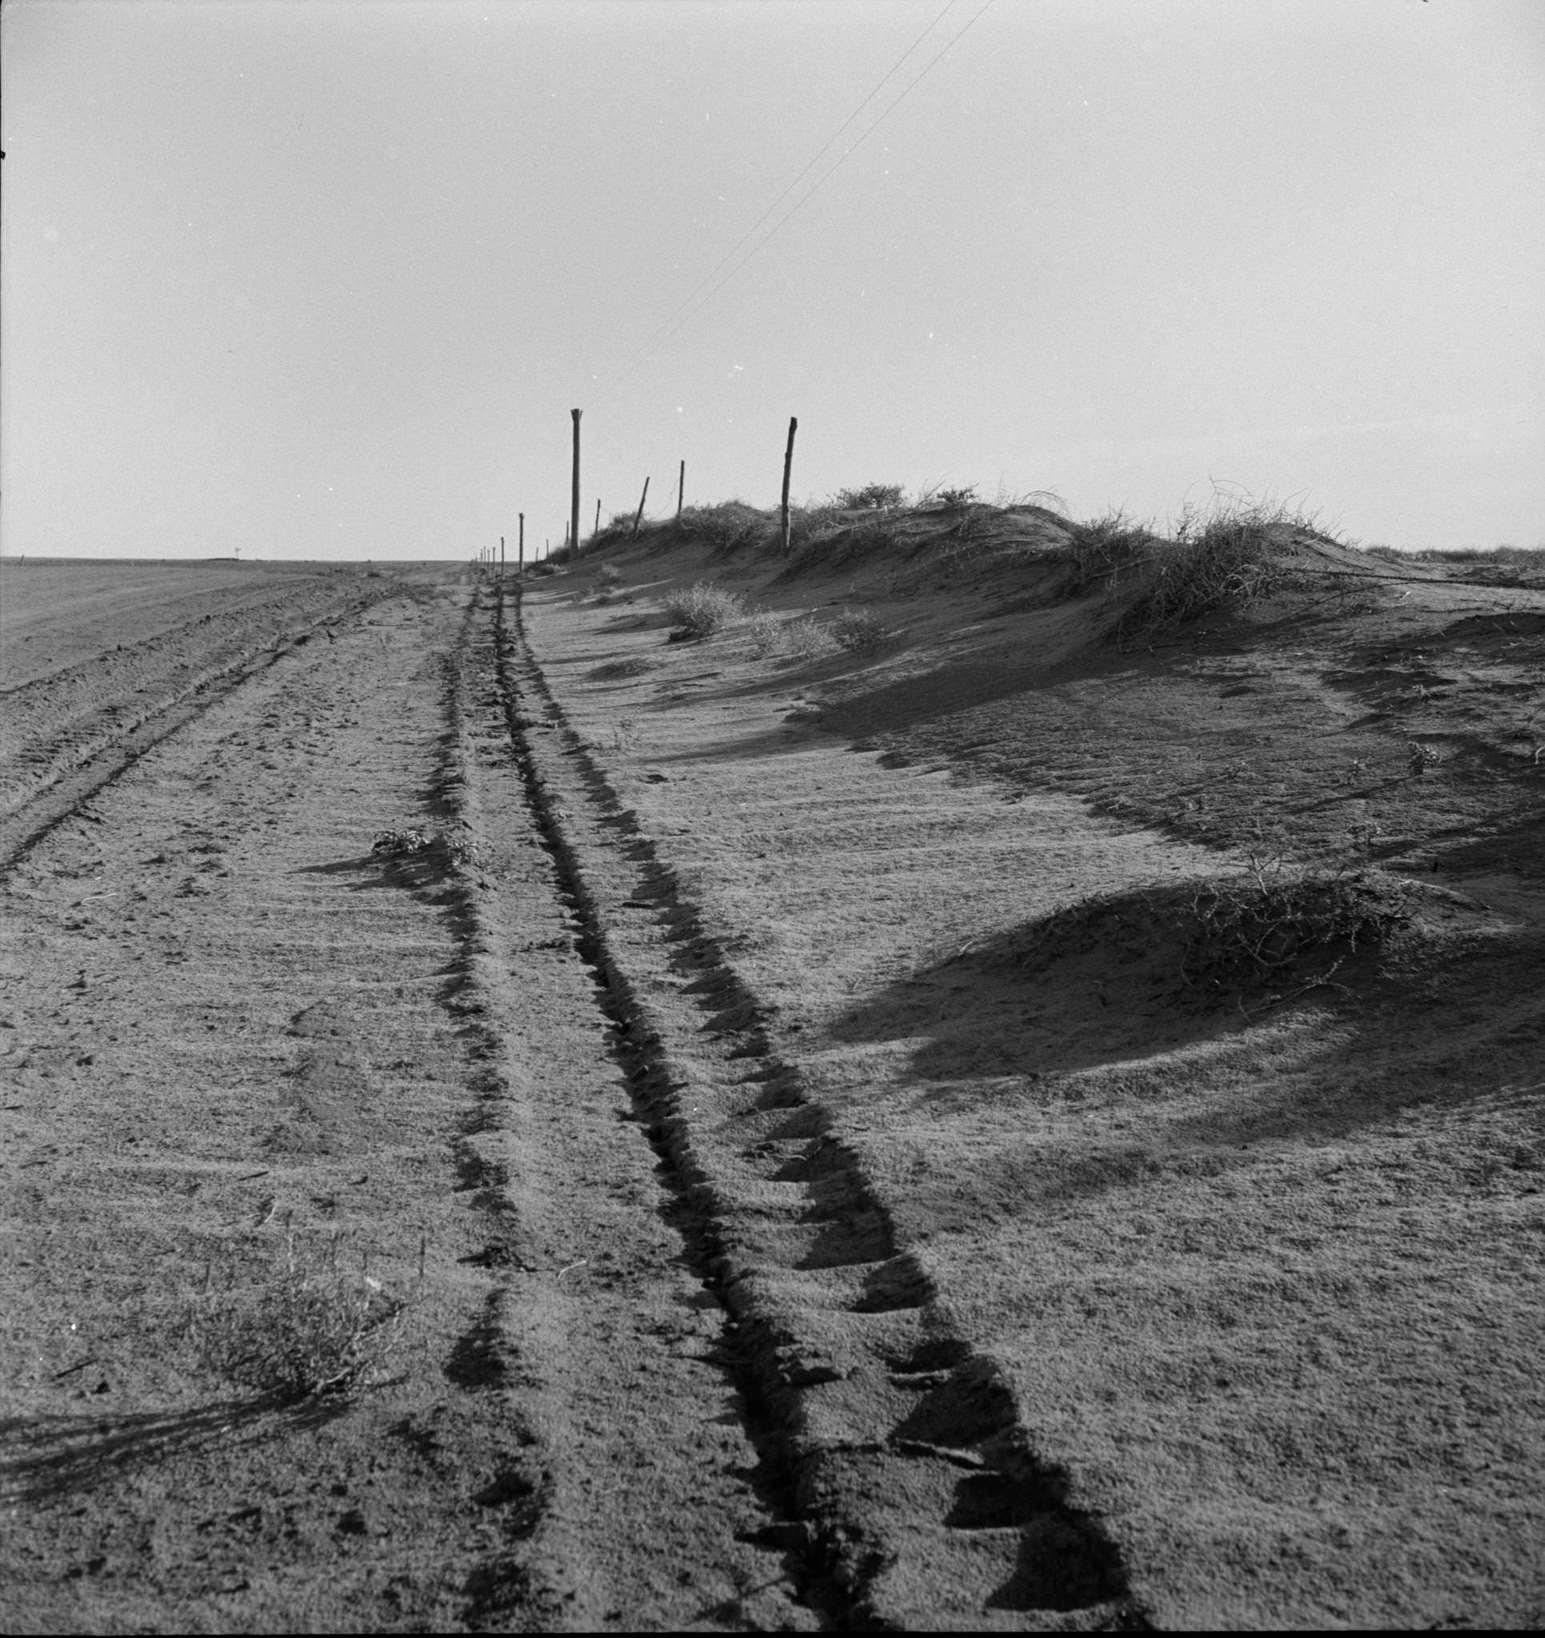 Sand drift along fence. Dust Bowl, north of Dalhart, Texas, 1930s